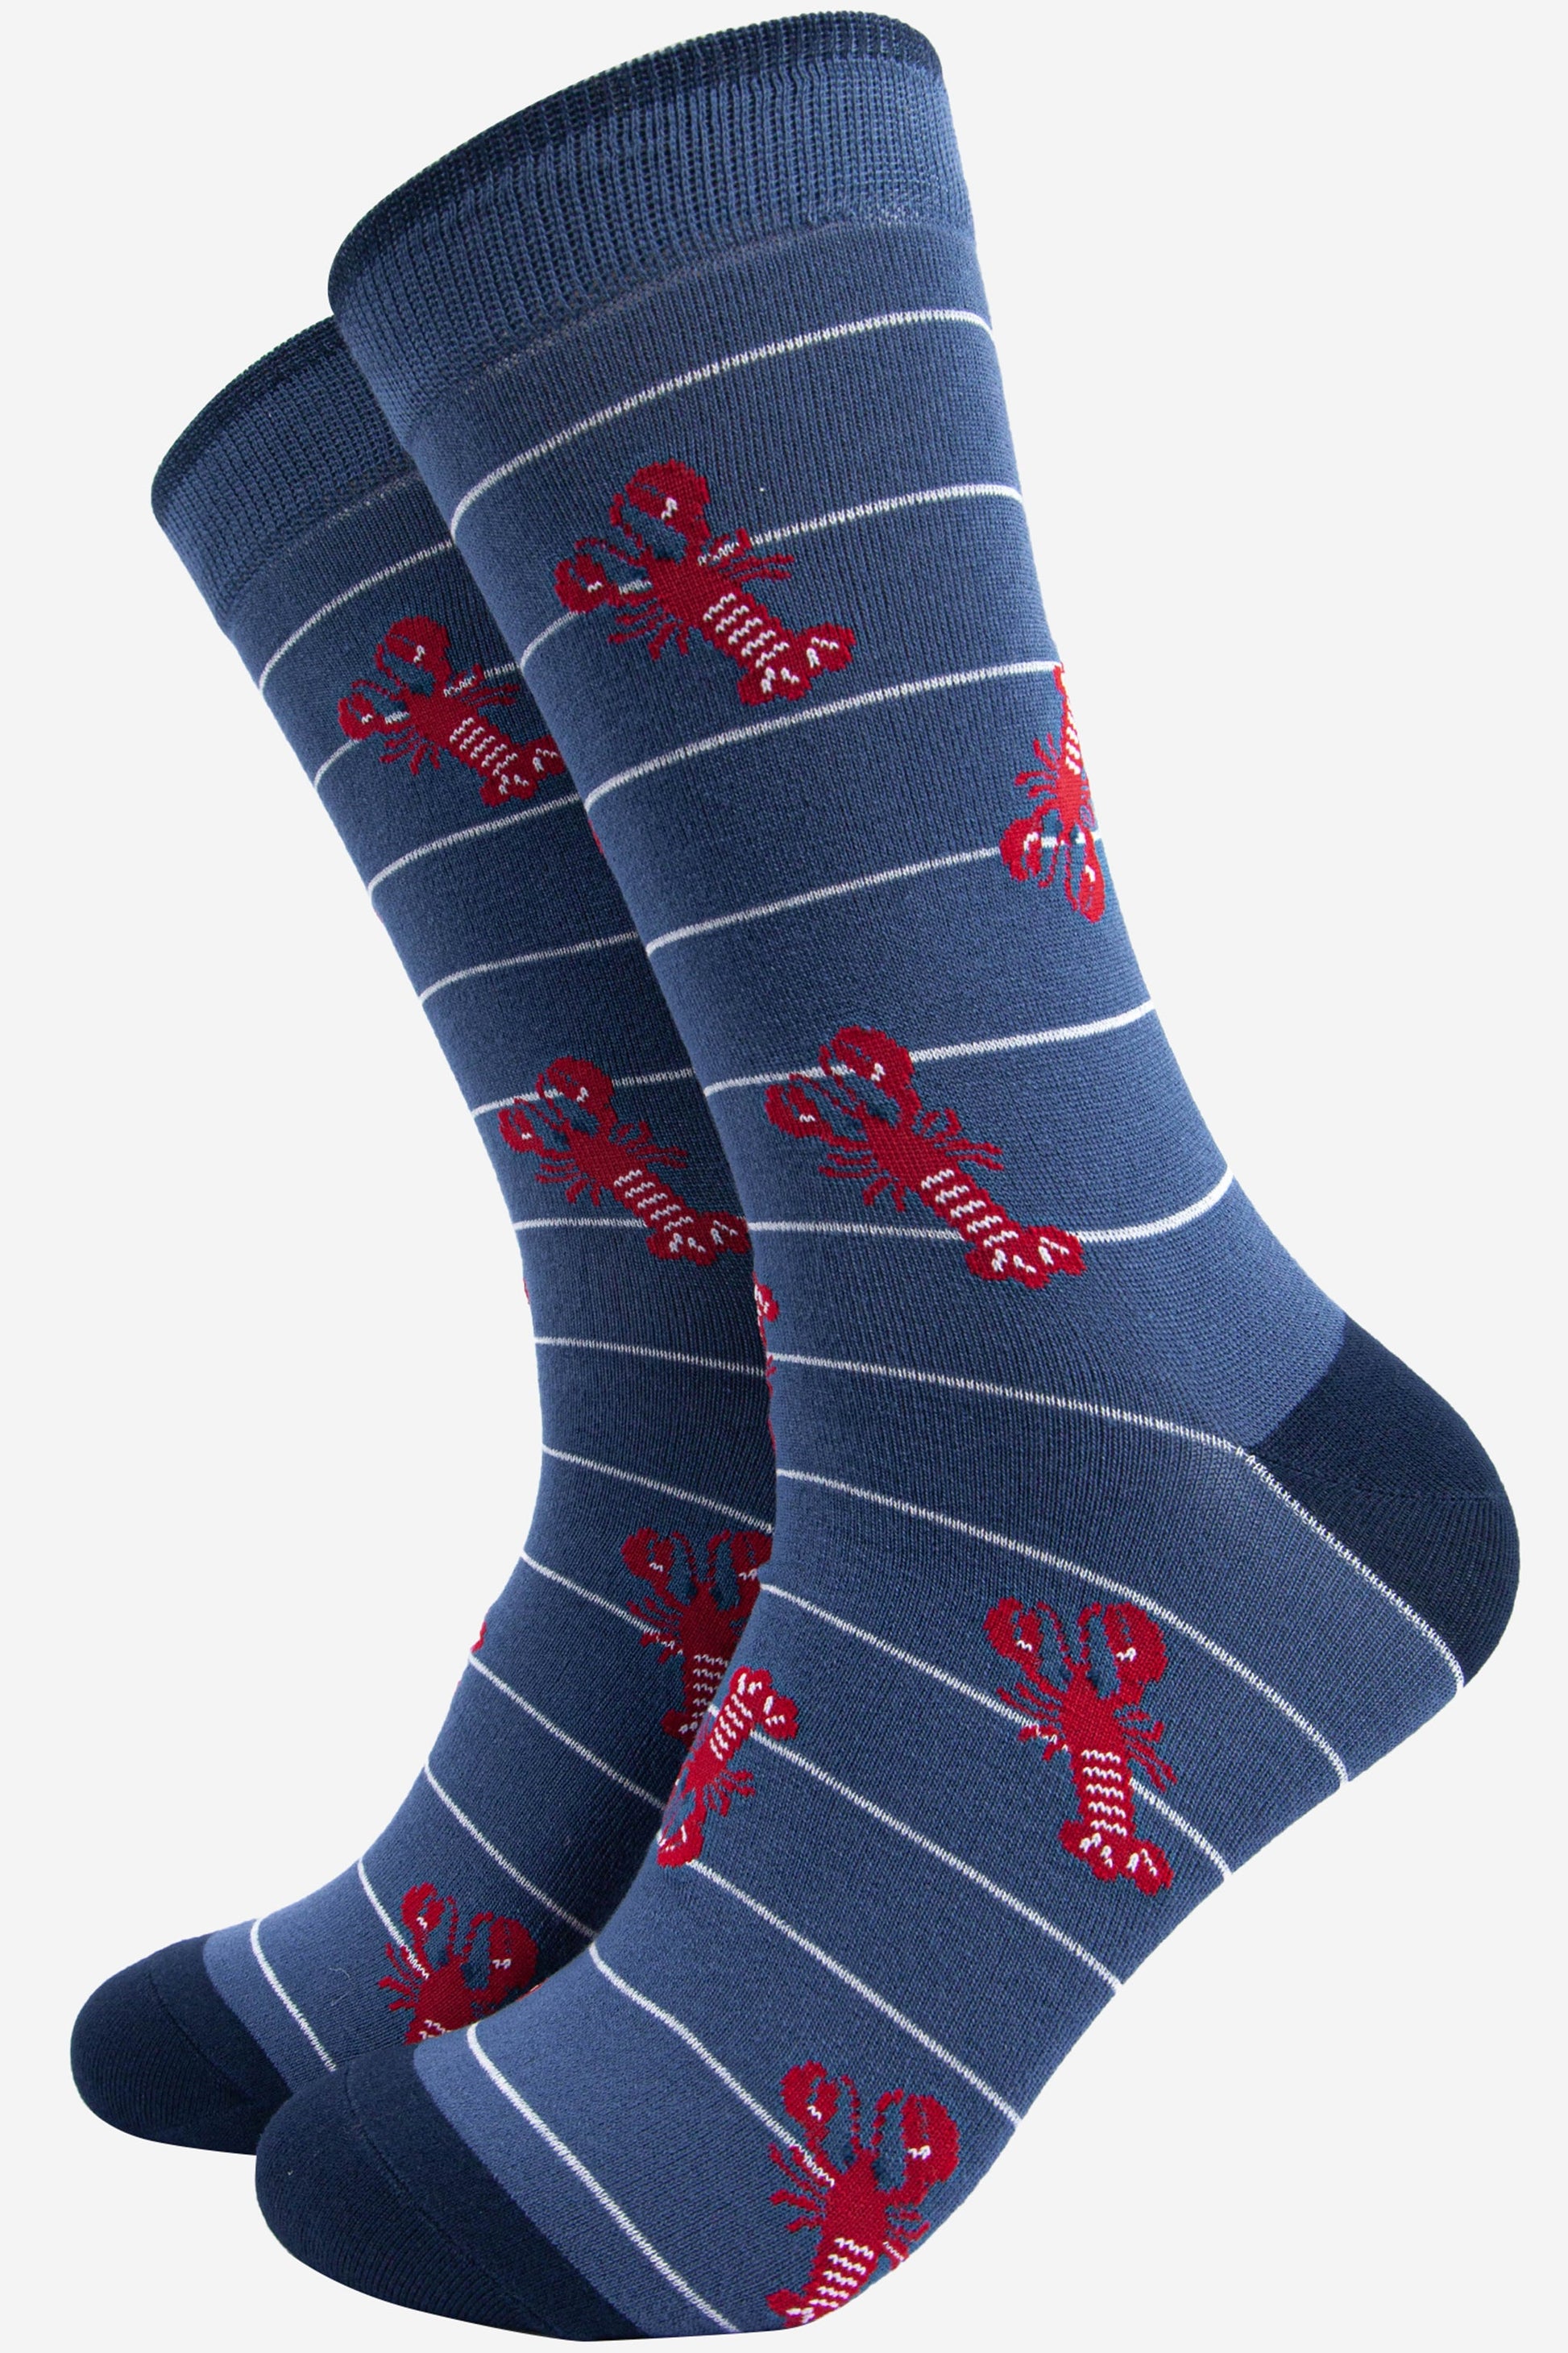 denim blue bamboo dress socks with an all over red lobster and white horizontal pin stripe pattern